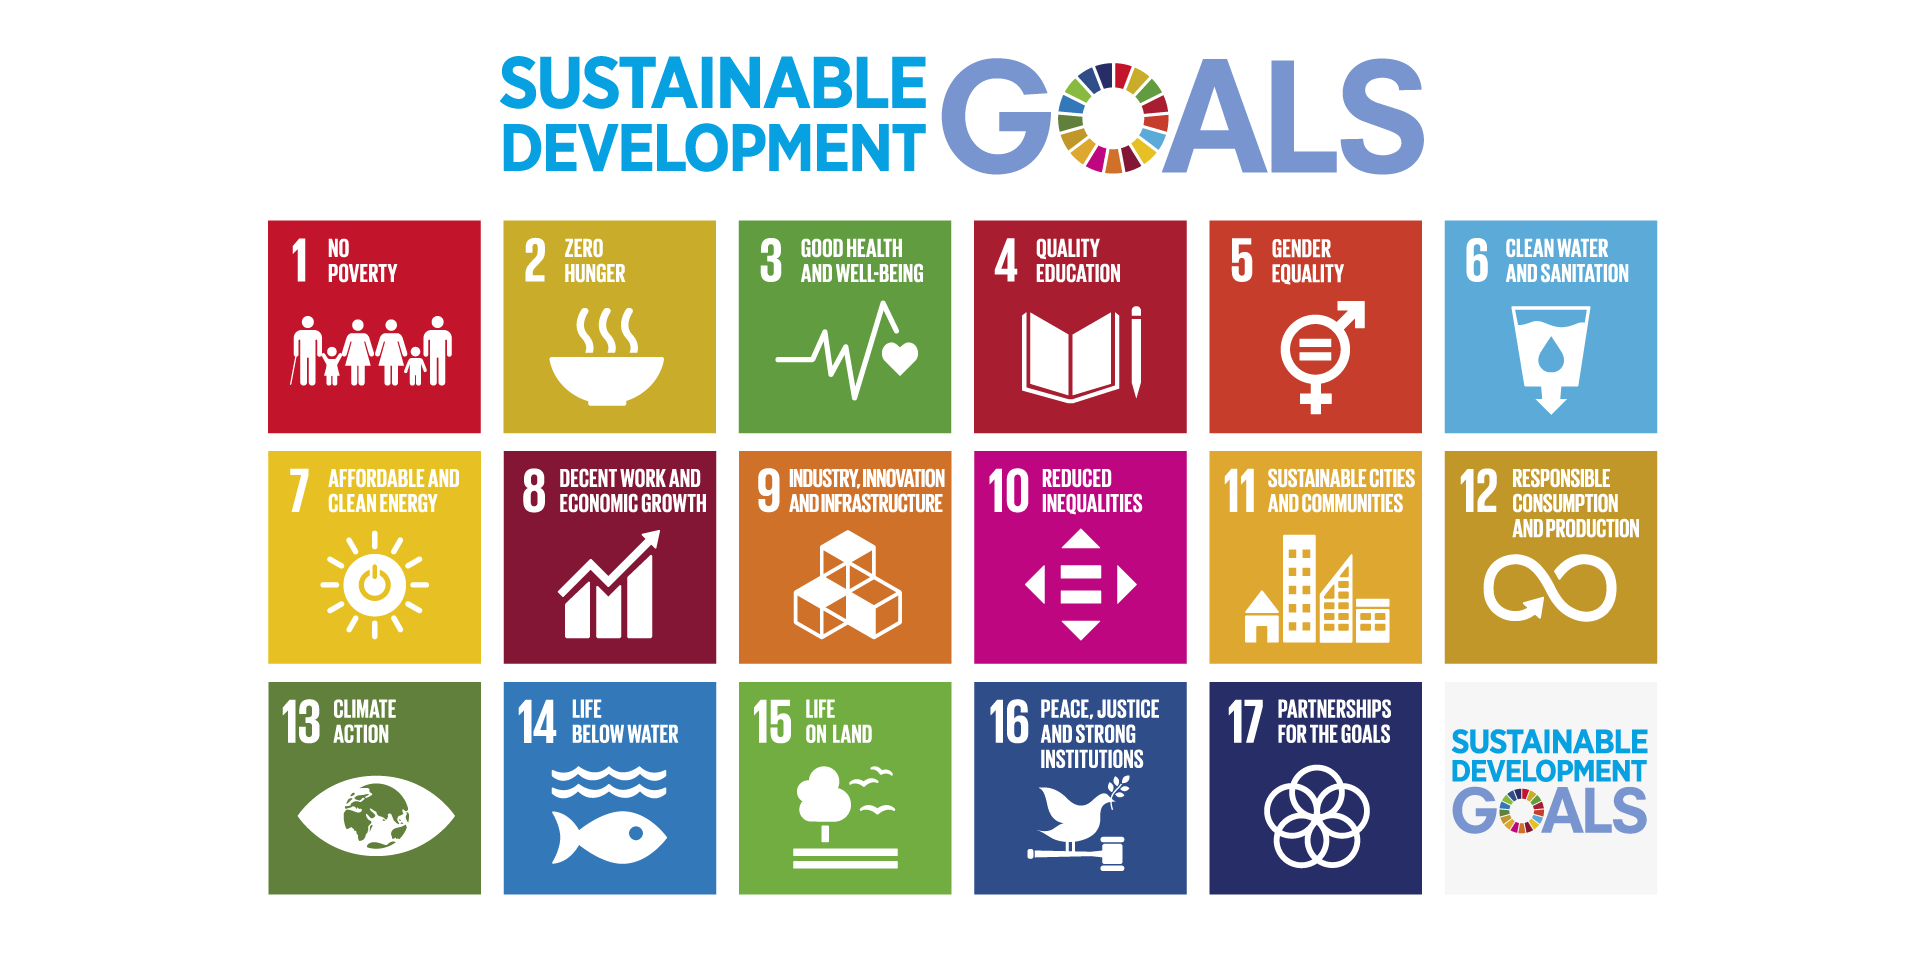 Graphic of the 17 sustainable development goals of the 2030 Agenda.